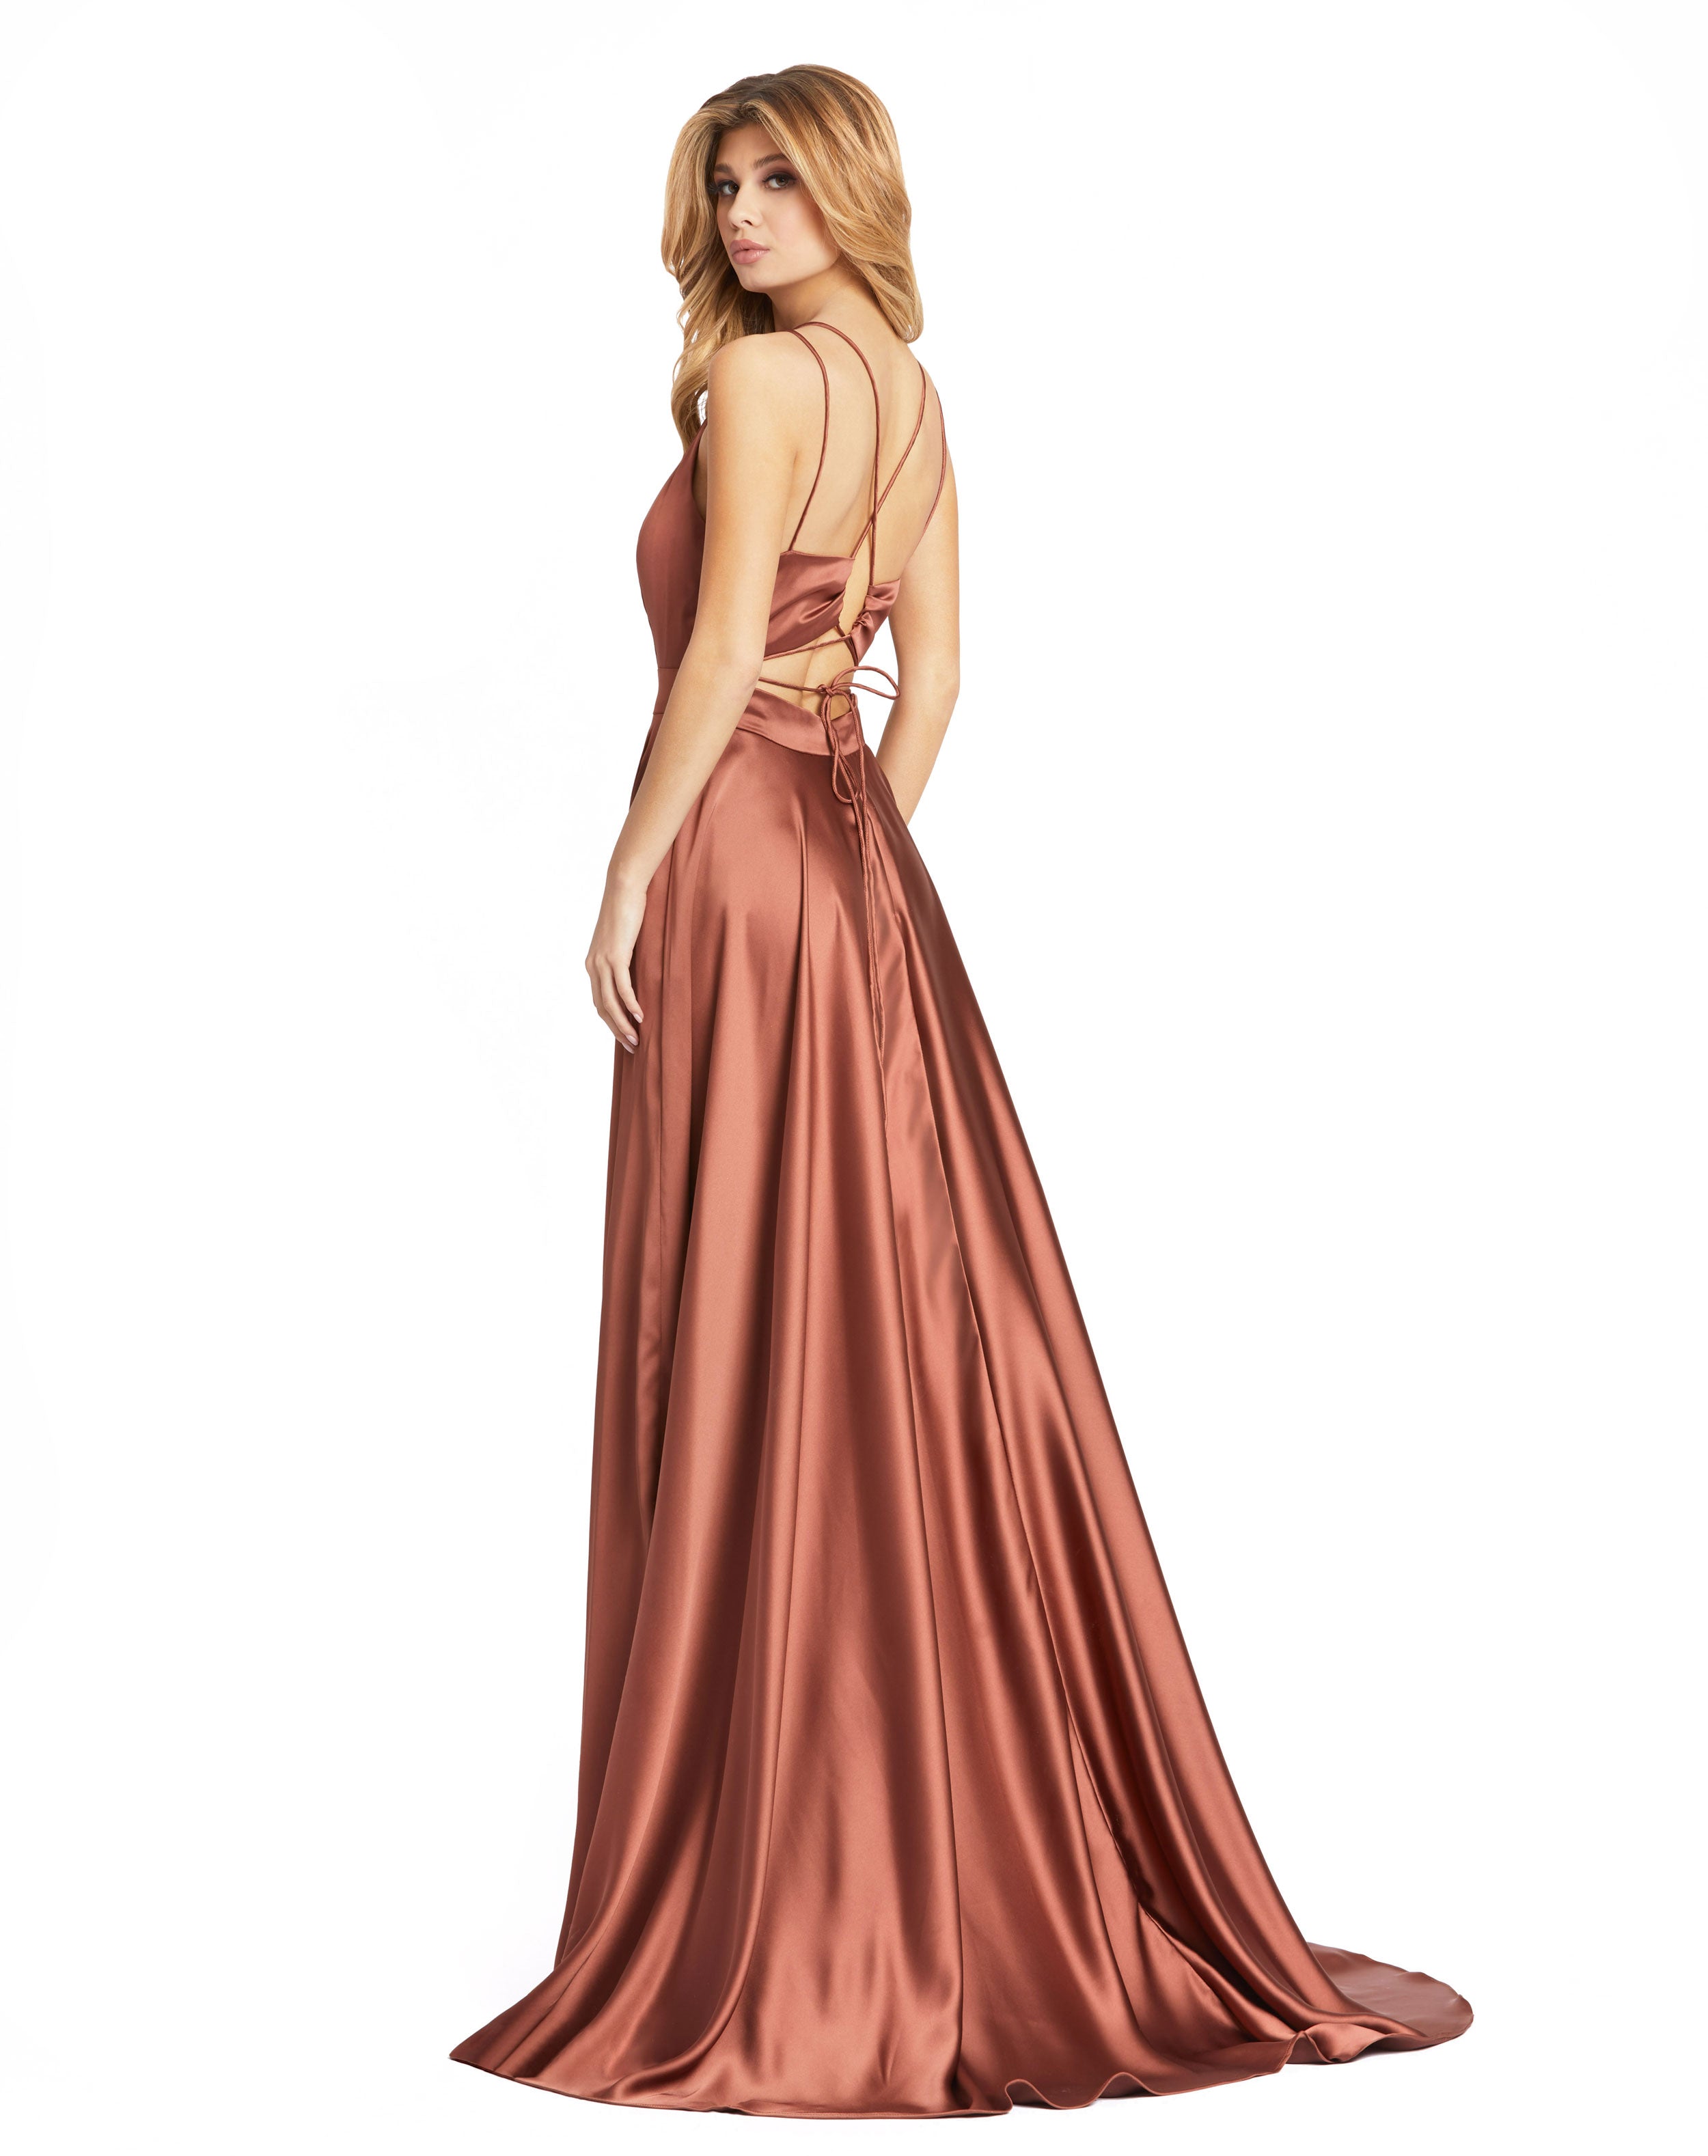 Satin Strappy-Back High Slit Gown